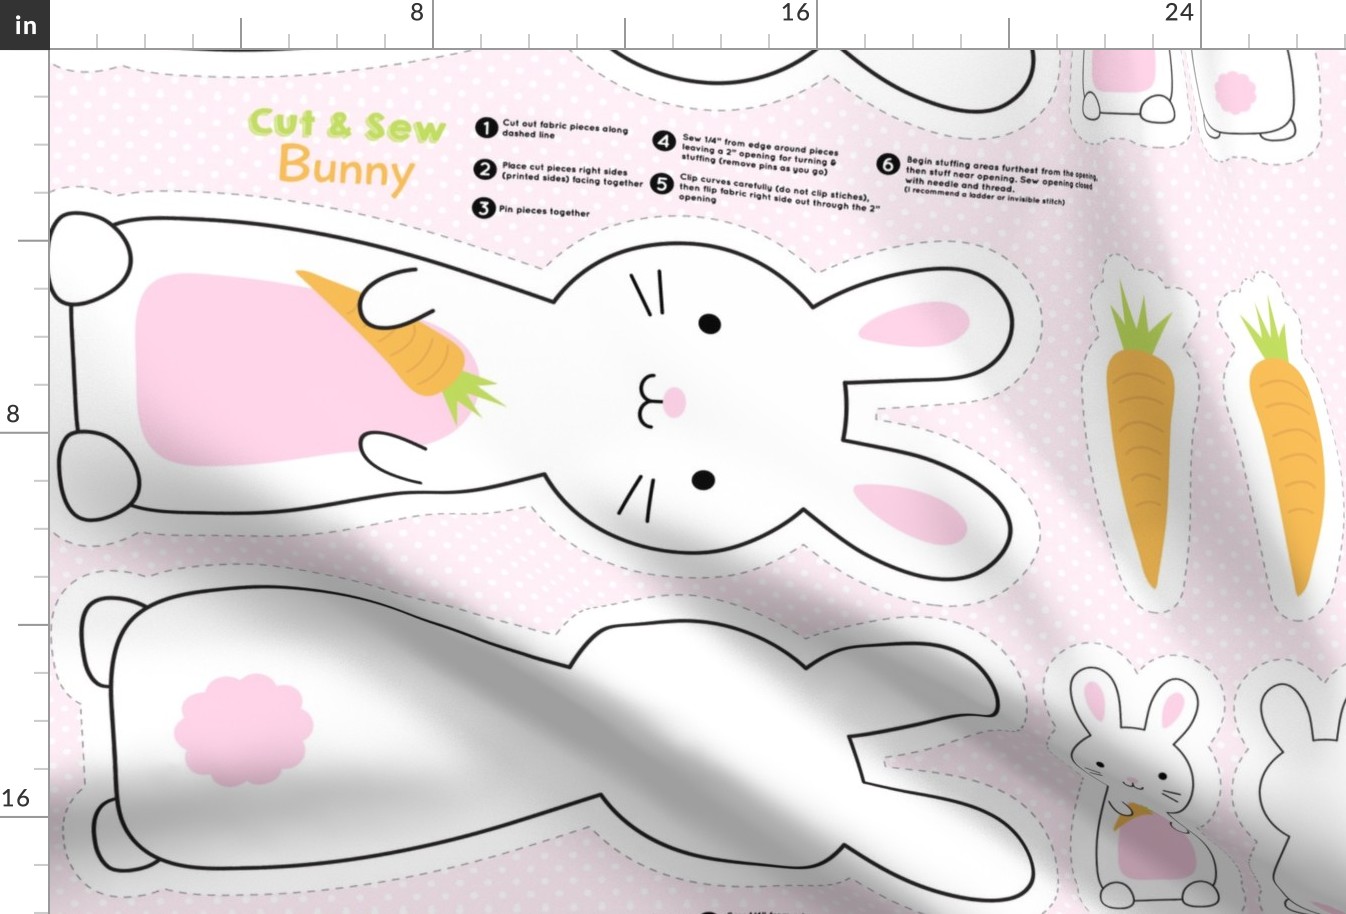 Cut and Sew pink bunnies 27" wide